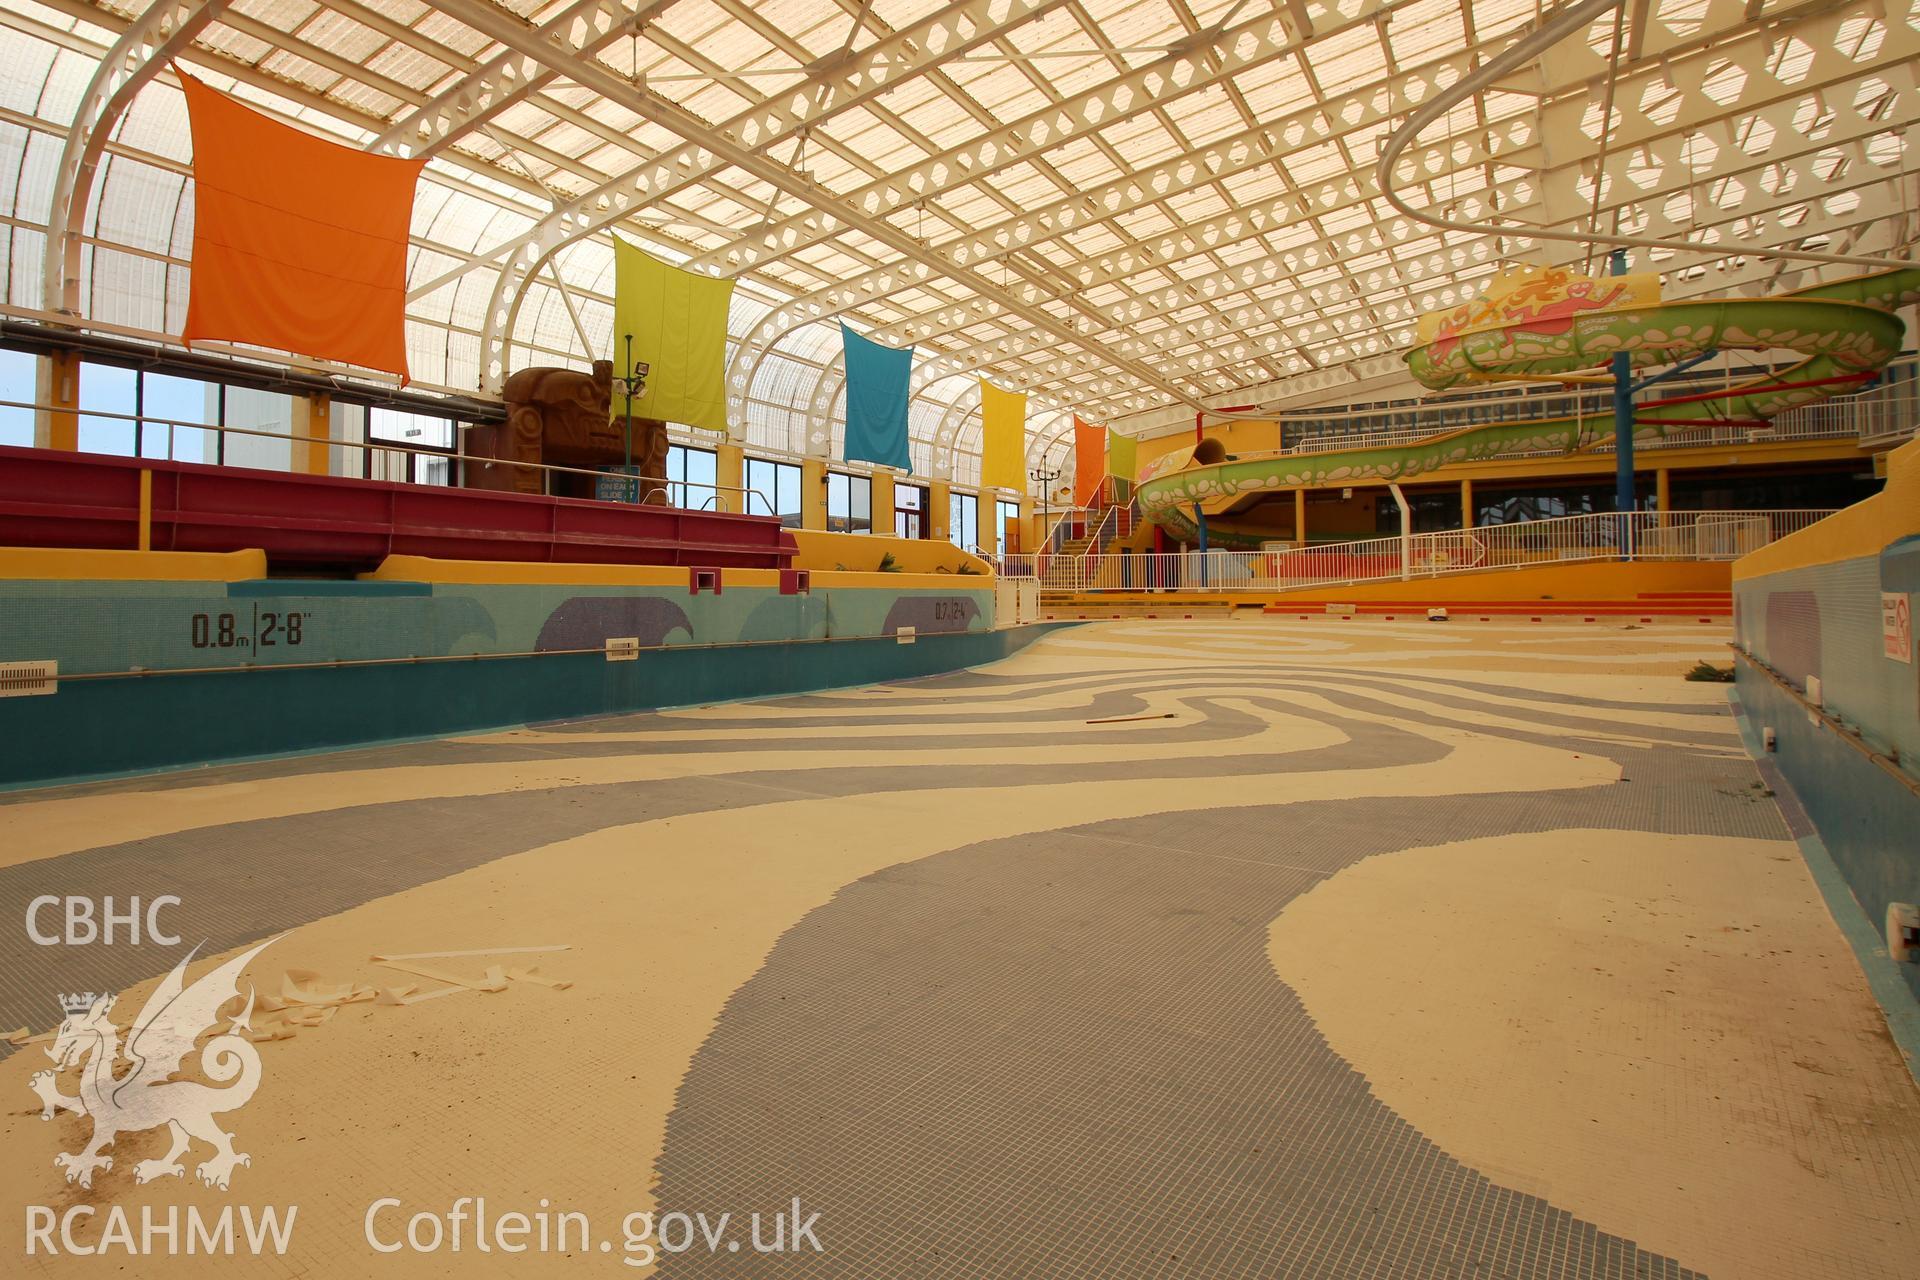 The wave pool at Rhyl Sun Centre, taken by Sue Fielding, 27th May 2016.